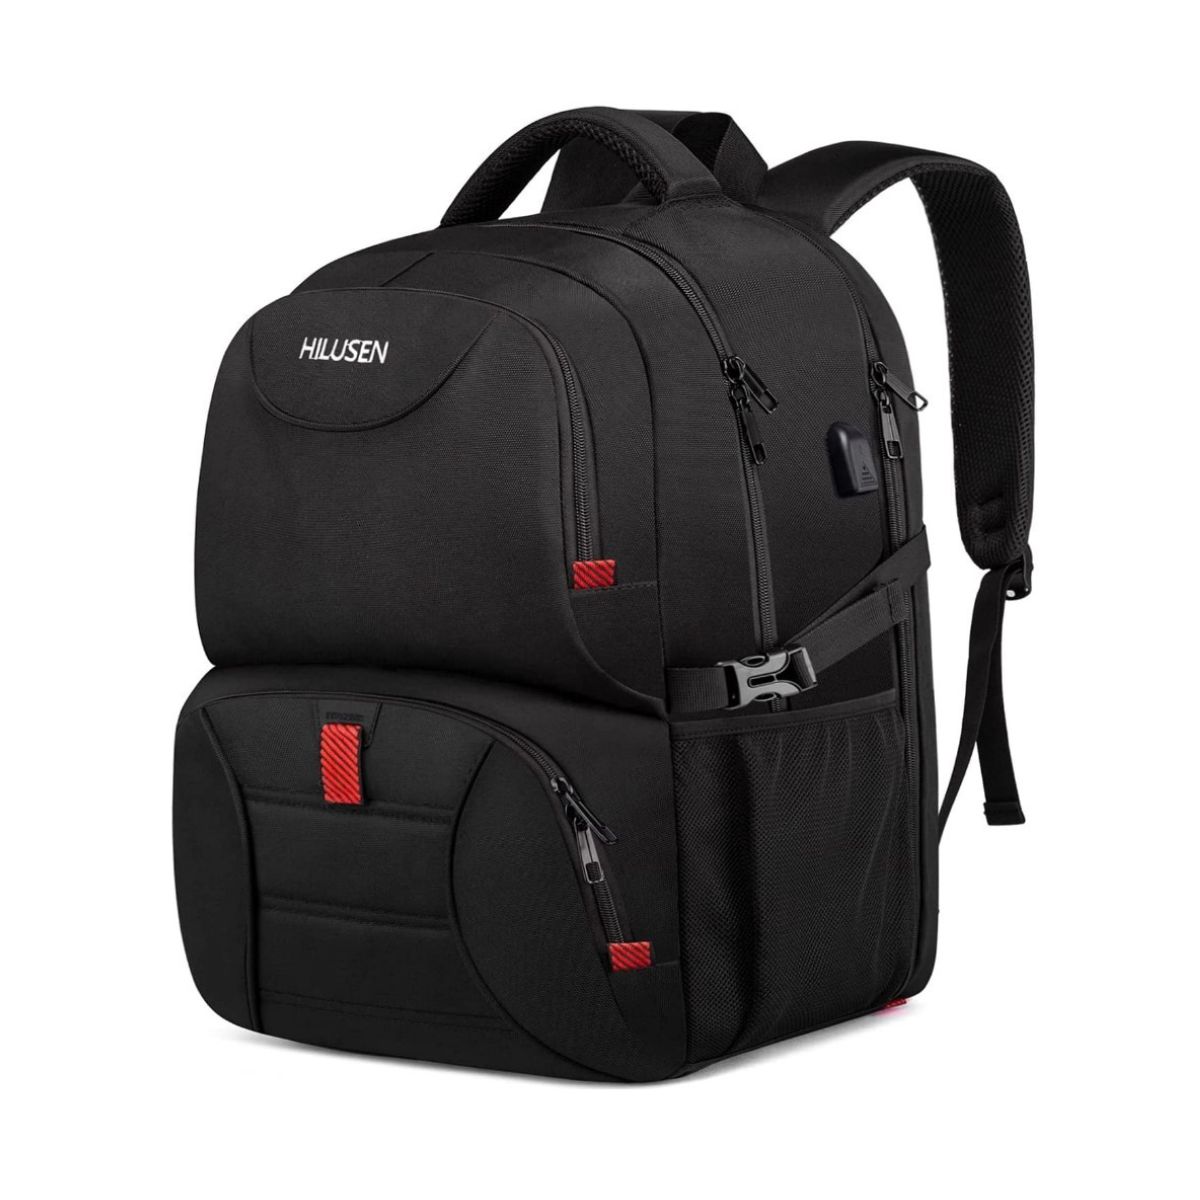 Black backpack lunch box with red trim